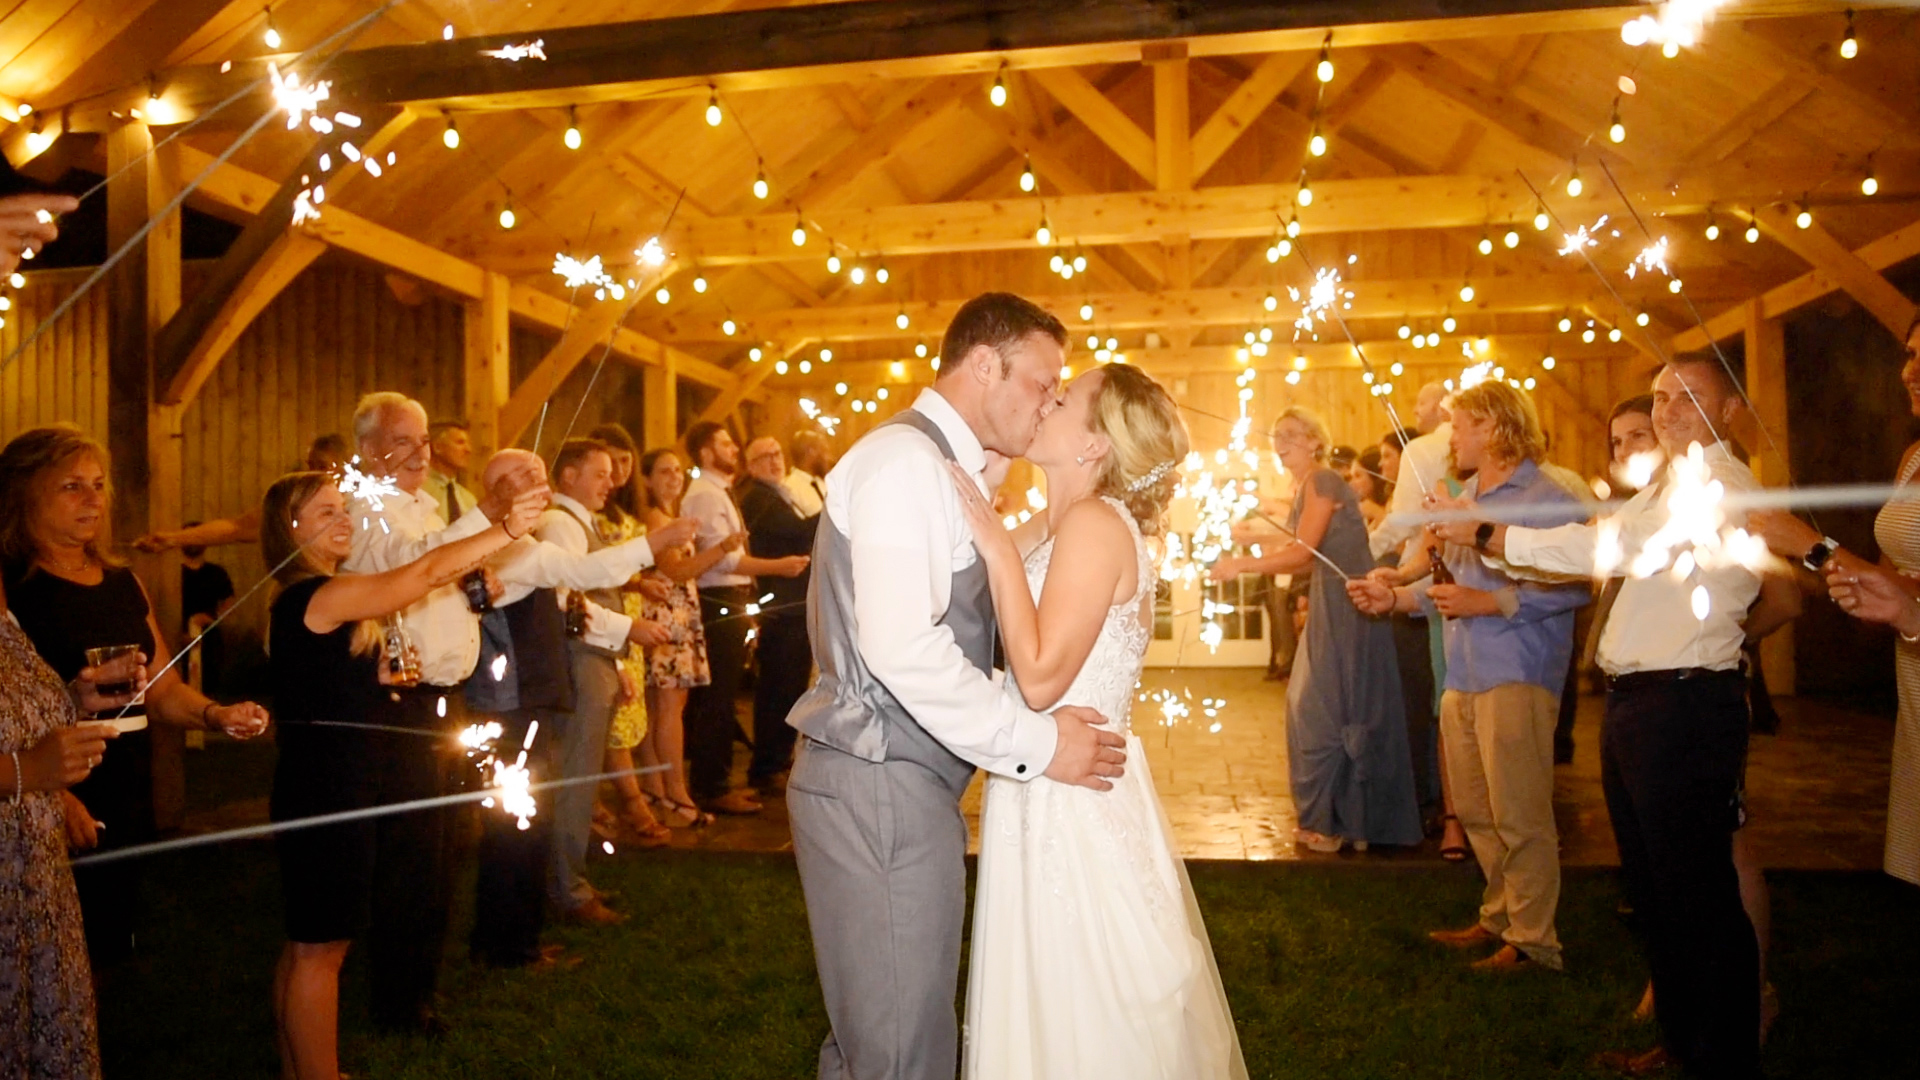 summer wedding sparkler sendoff at fortune valley manor in saugerties ny